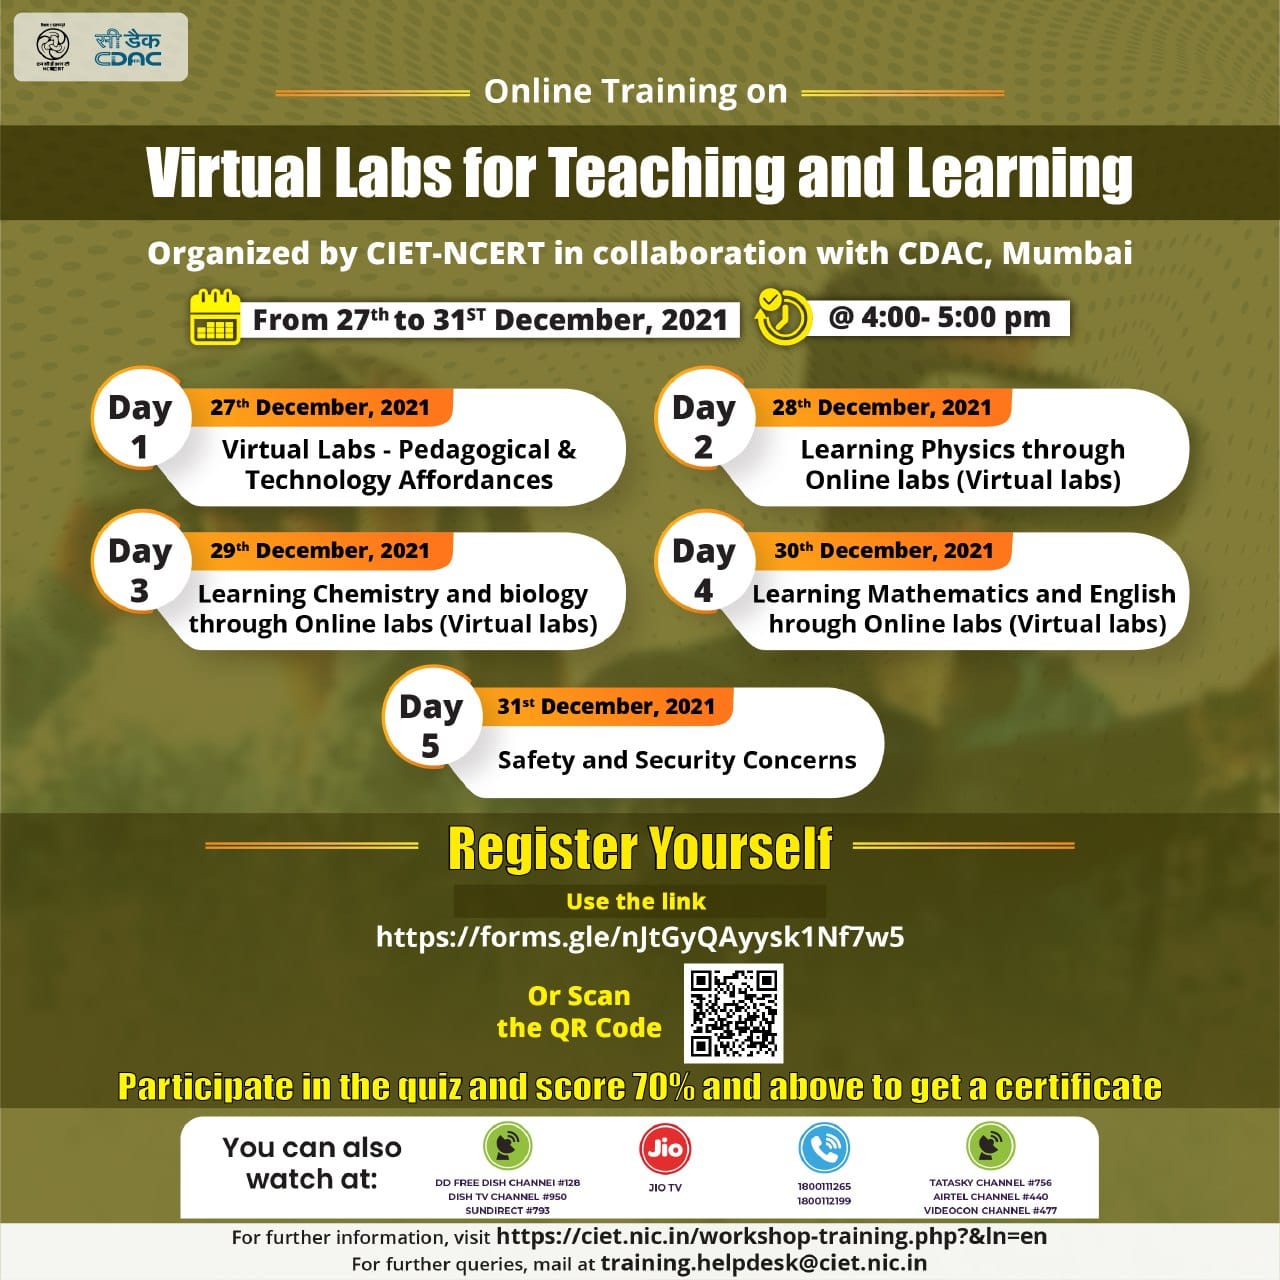 Online Training on “Virtual Labs for Teaching and Learning” Image